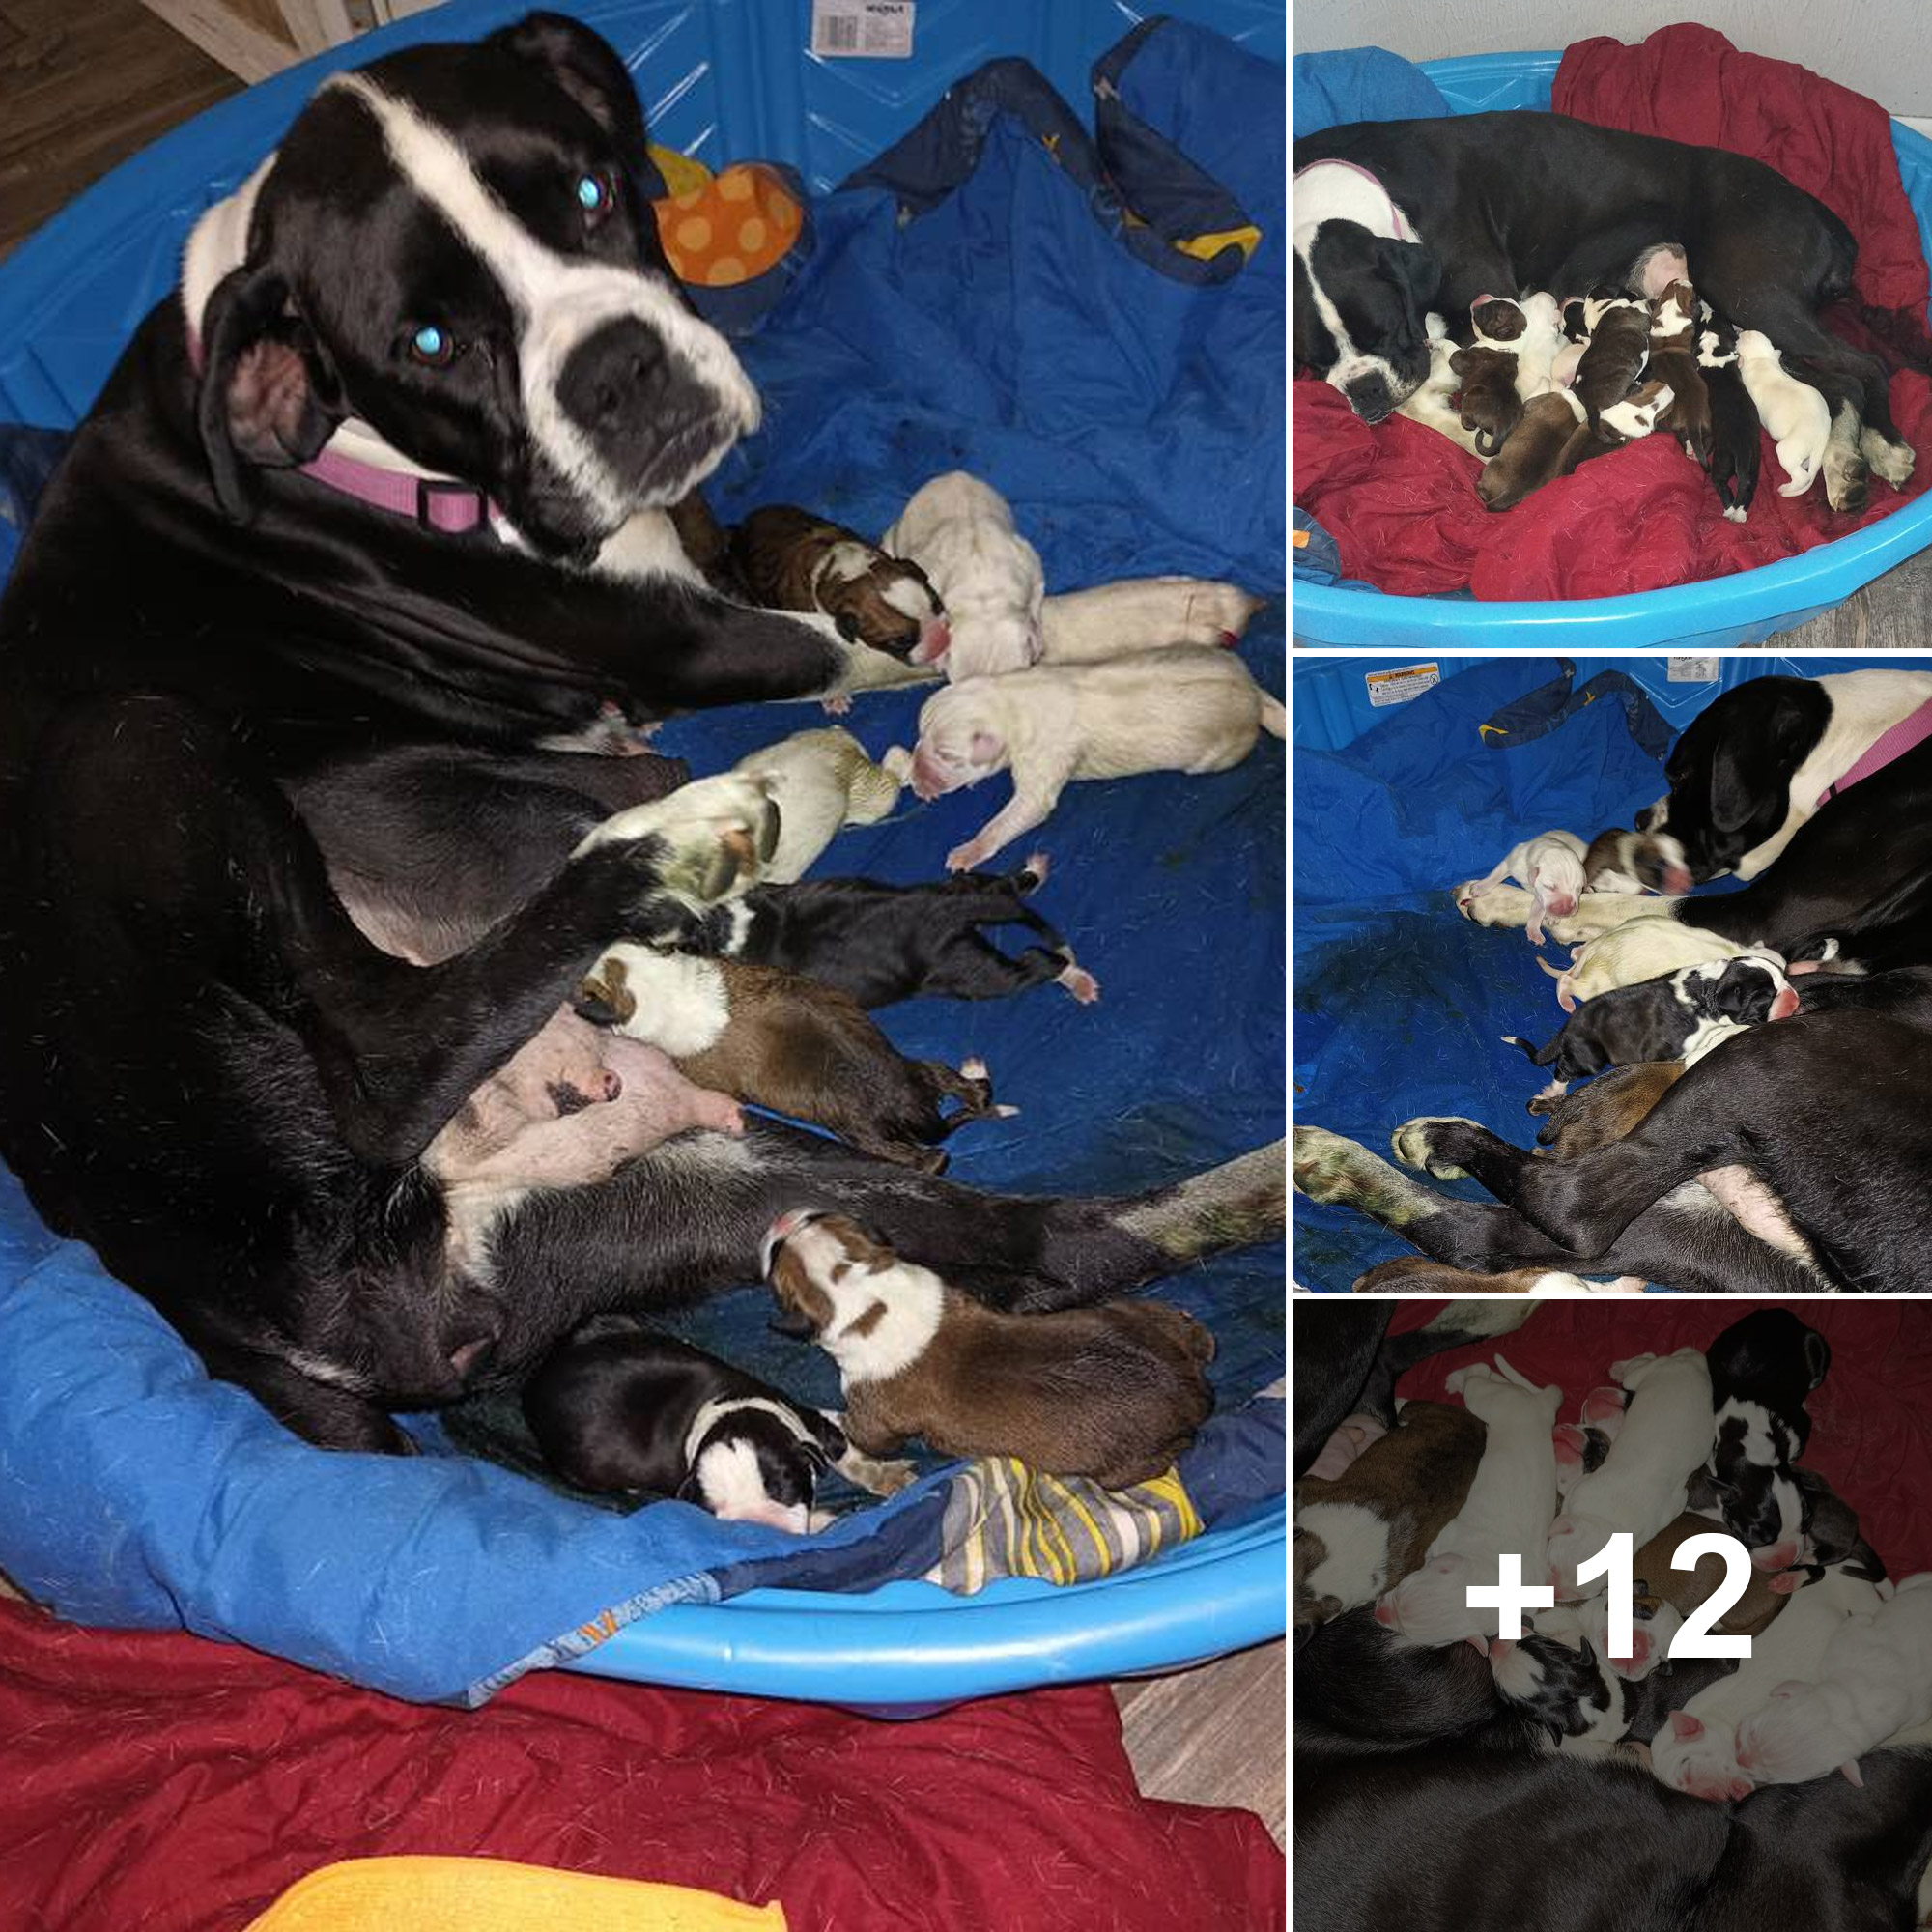 Heartbreaking discovery: Mother Boxer dog and 10 newborn puppies ...